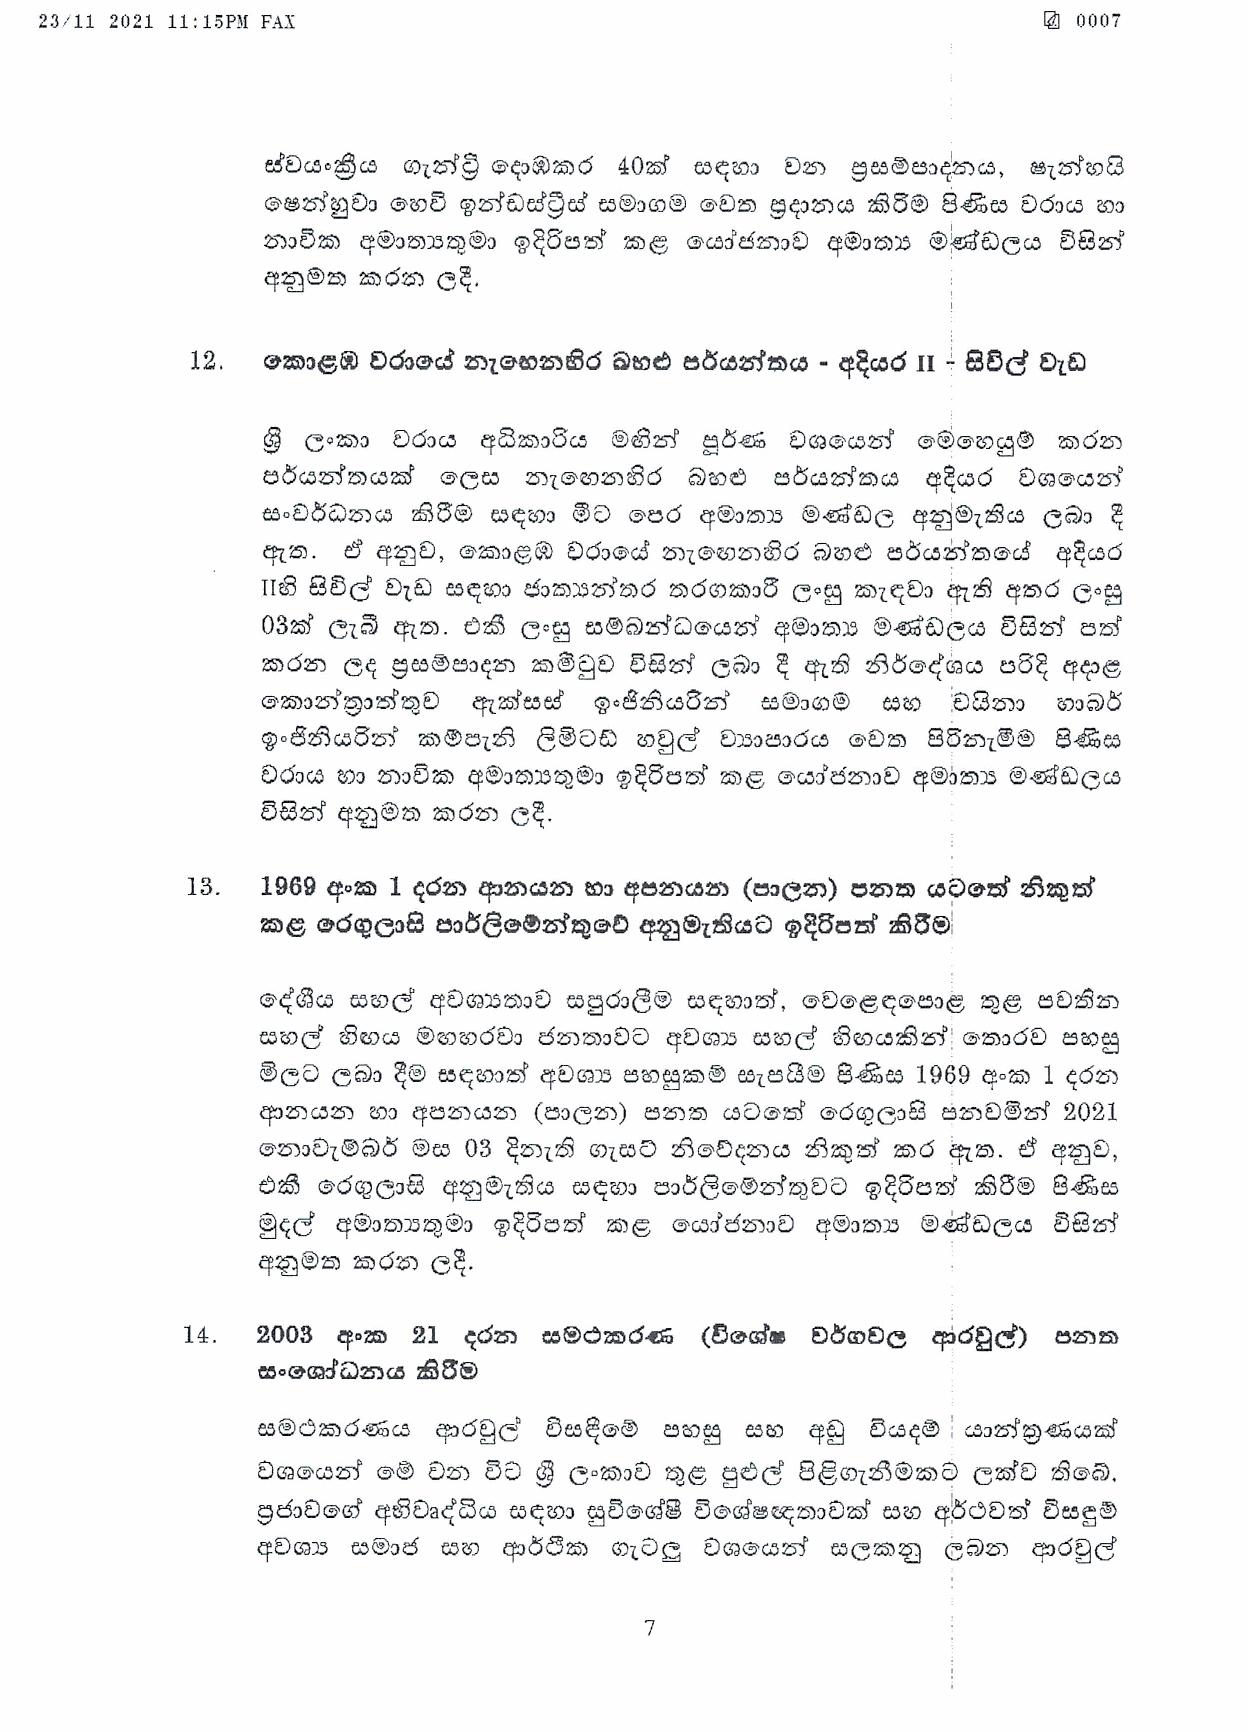 Cabinet Decision on 23.11.2021 page 007